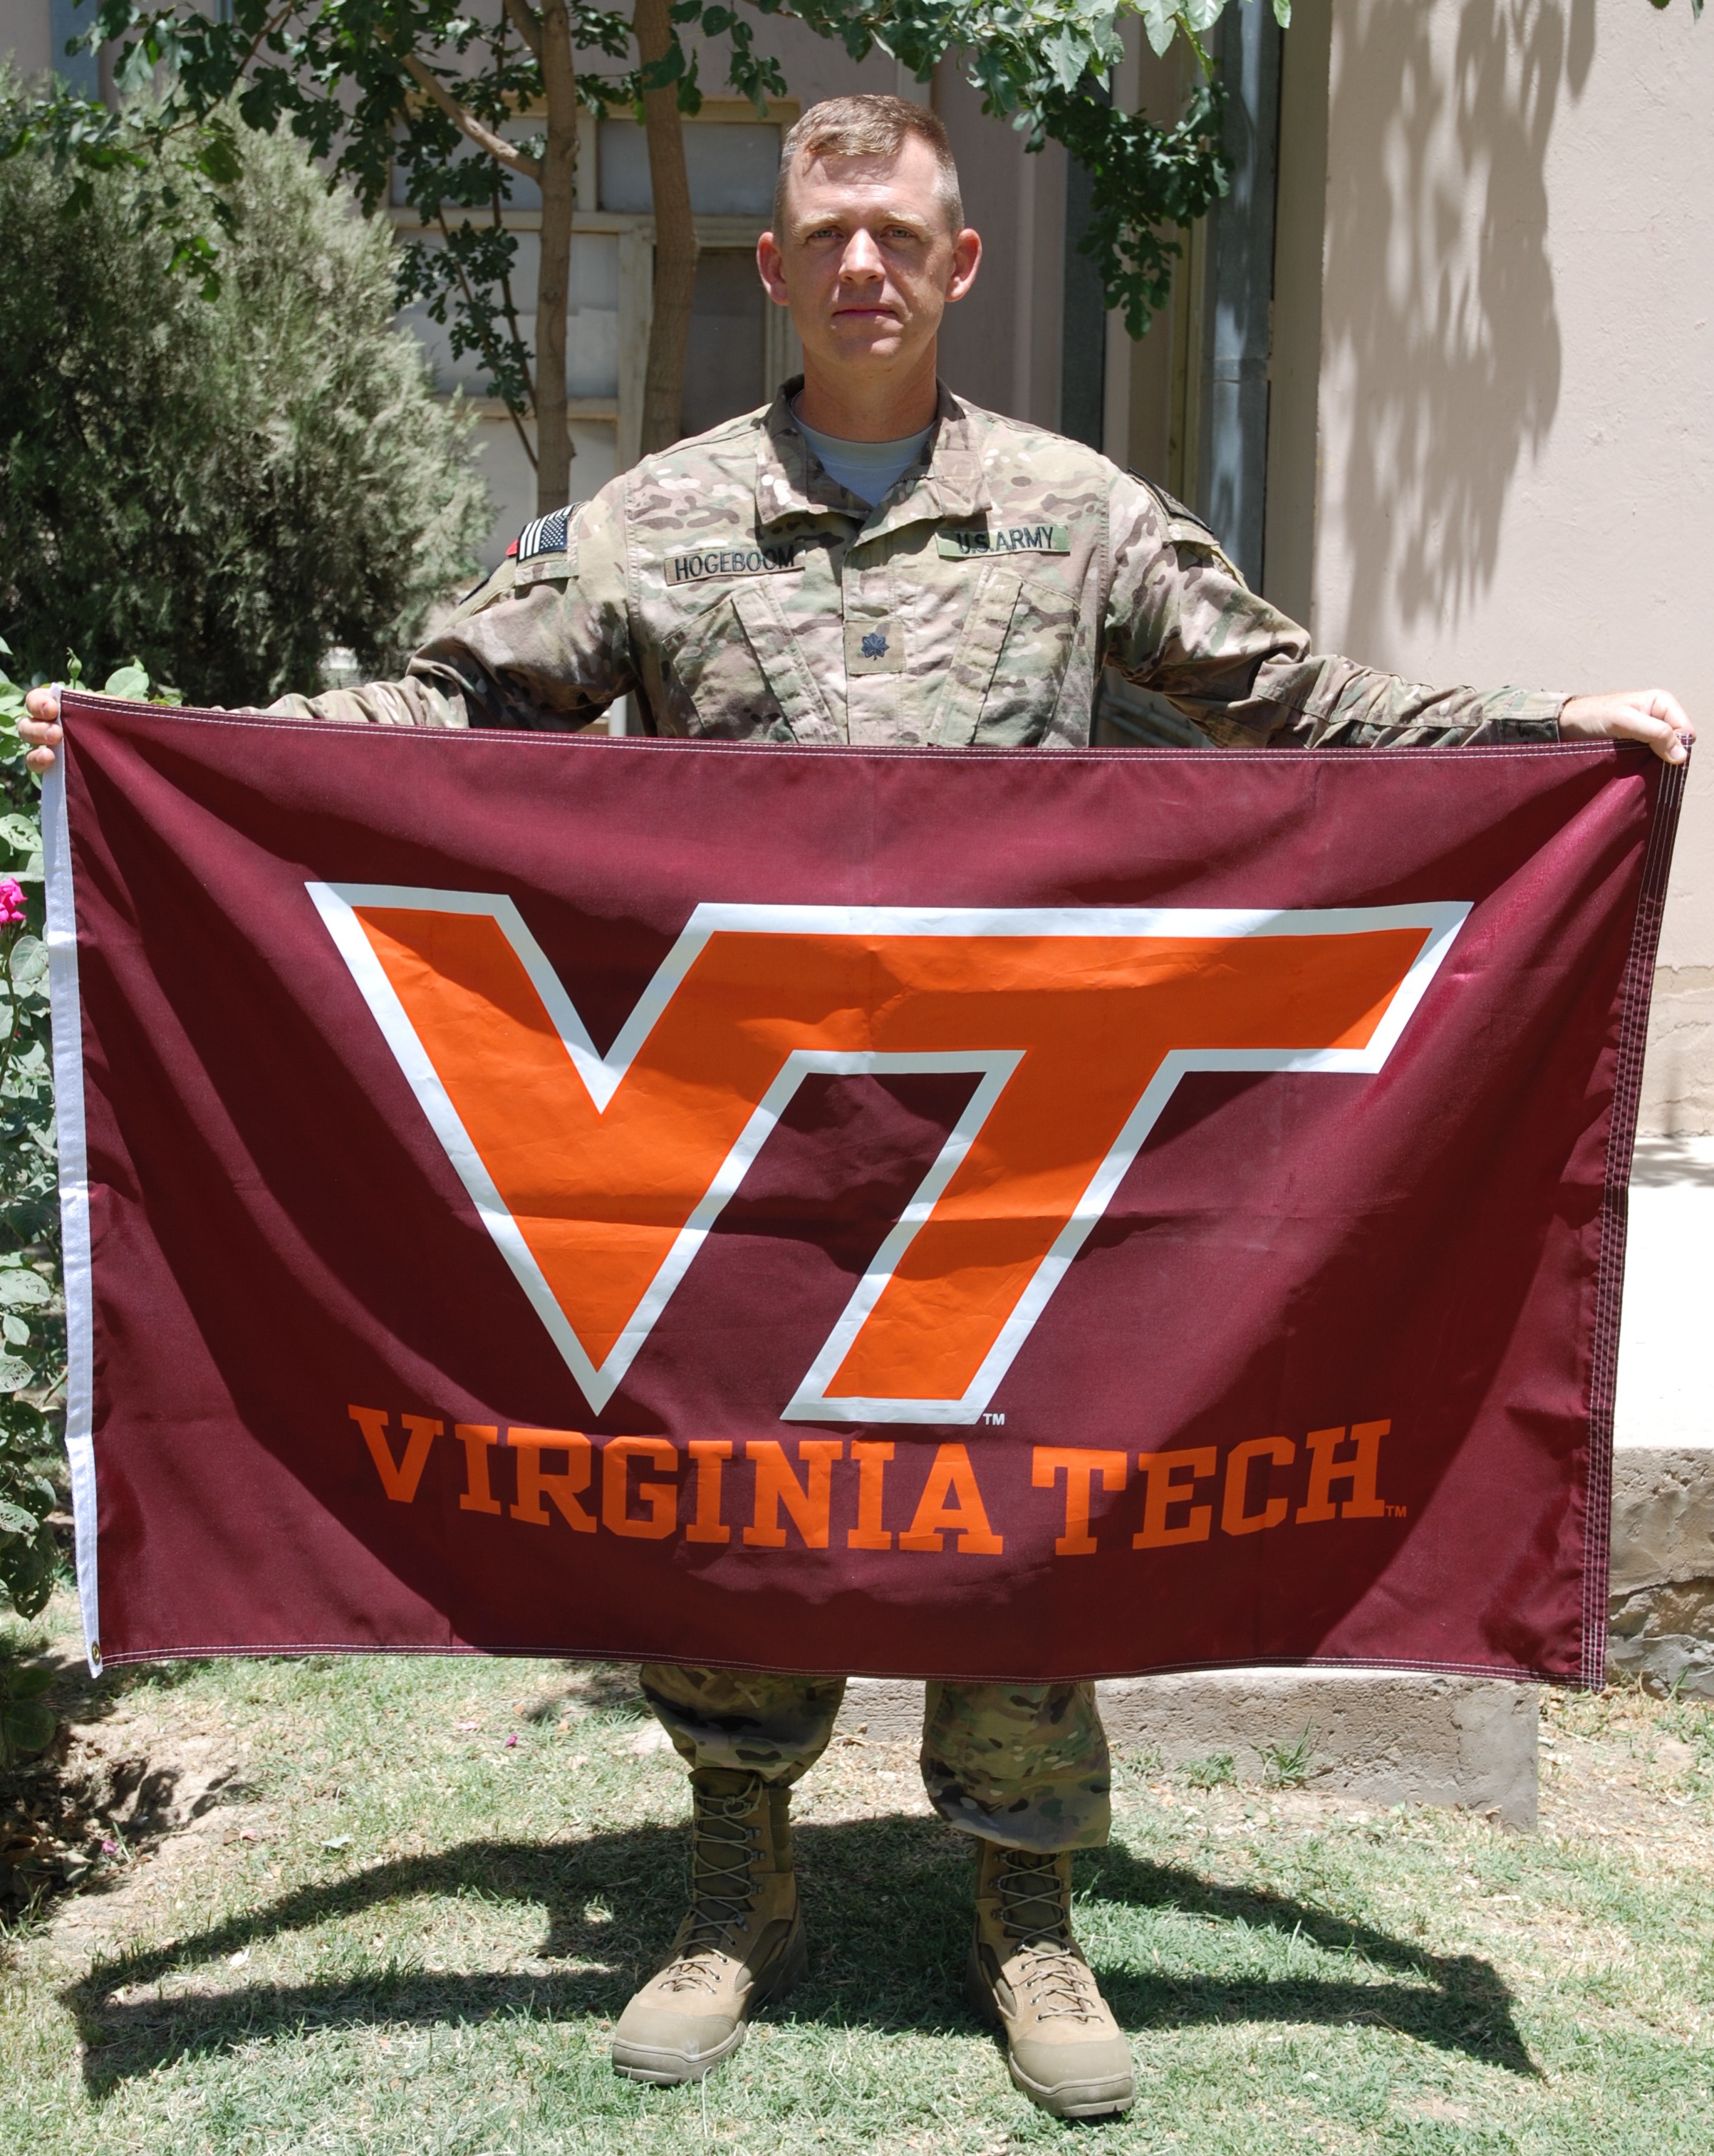 Lt. Col. Patrick Hogeboom, U.S. Army, Virginia Tech Corps of Cadets Class of 1994 holding the VT flag